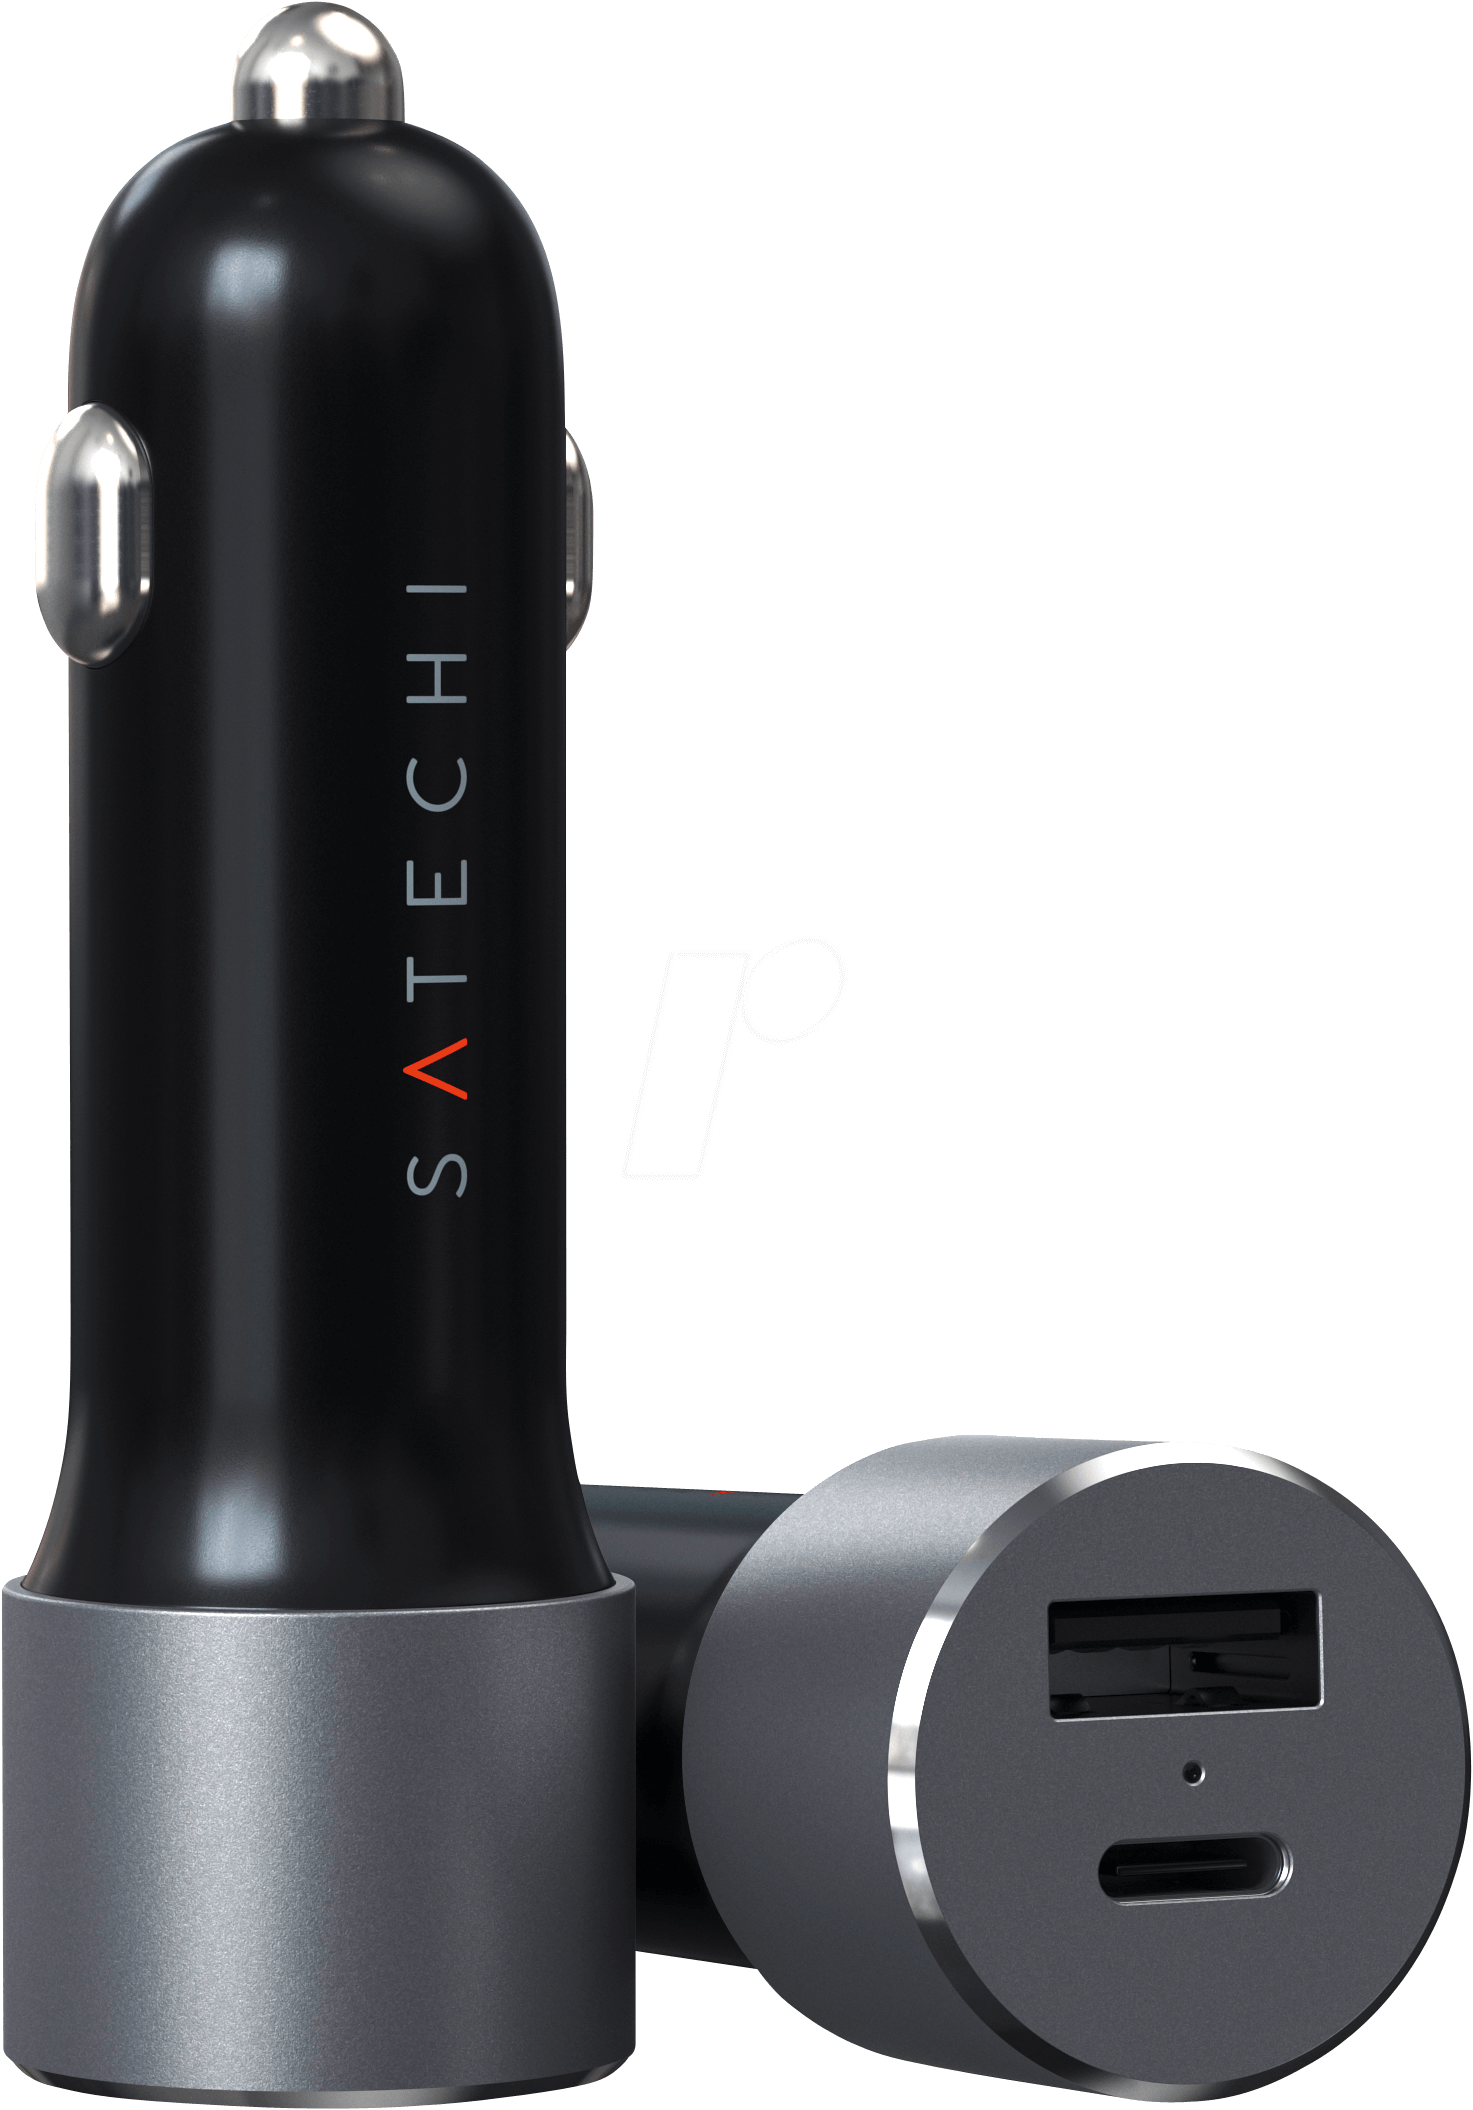 ST-TCPDCCM - Satechi 72W Type-C PD Car Charger space gray von SATECHI